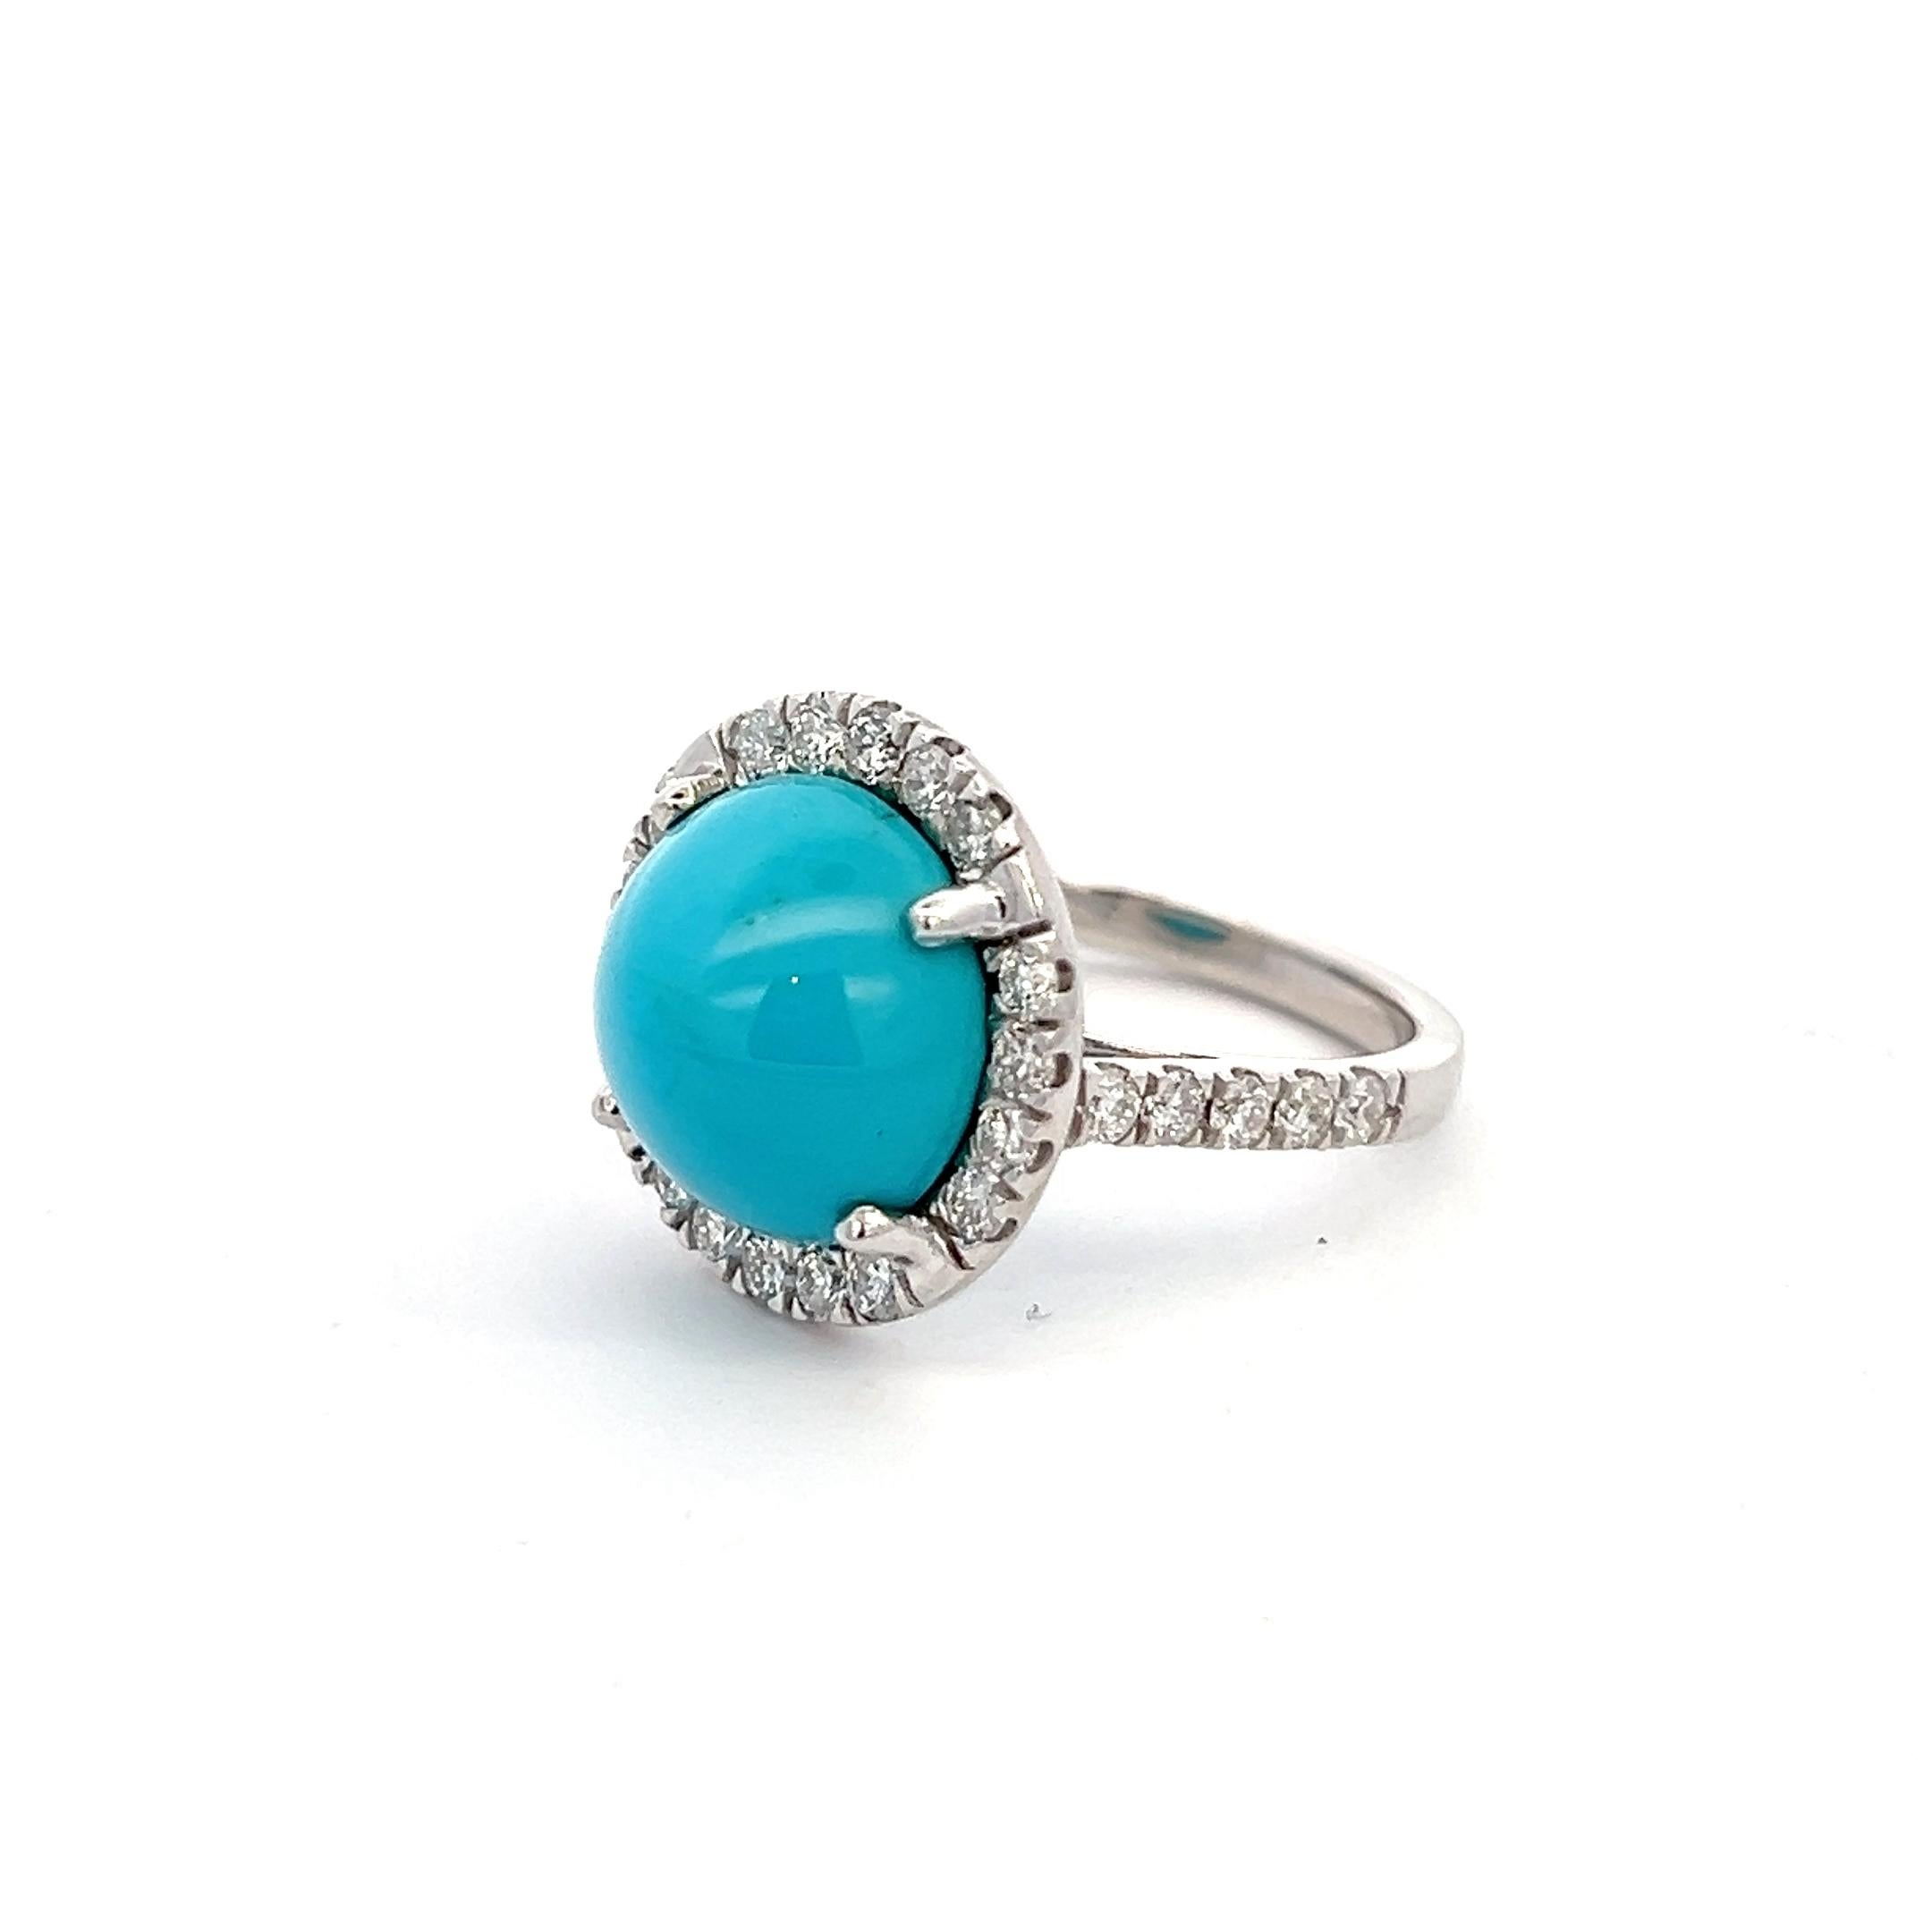 Cabochon Natural Persian Turquoise Diamond Ring 6.5 14k WG 8.33 TCW Certified For Sale